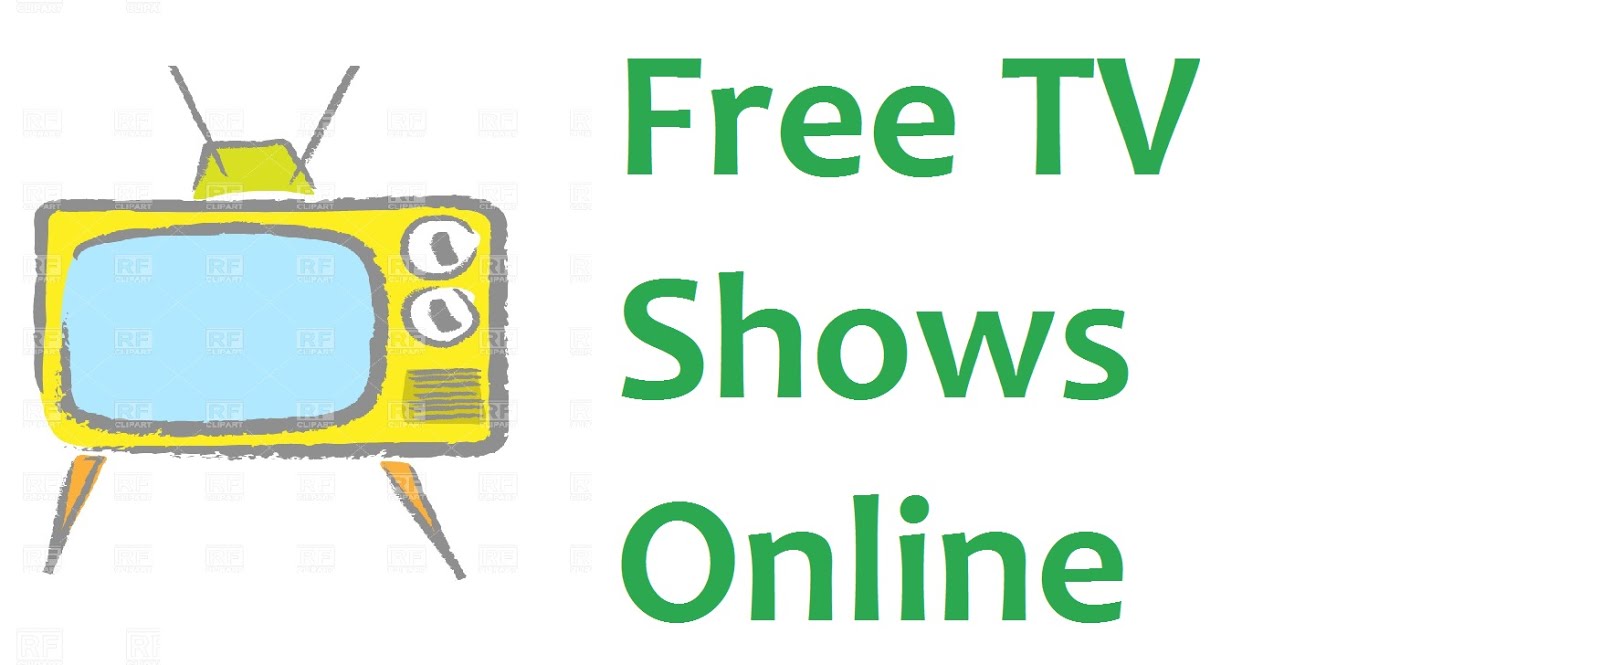 Free TV Shows Online